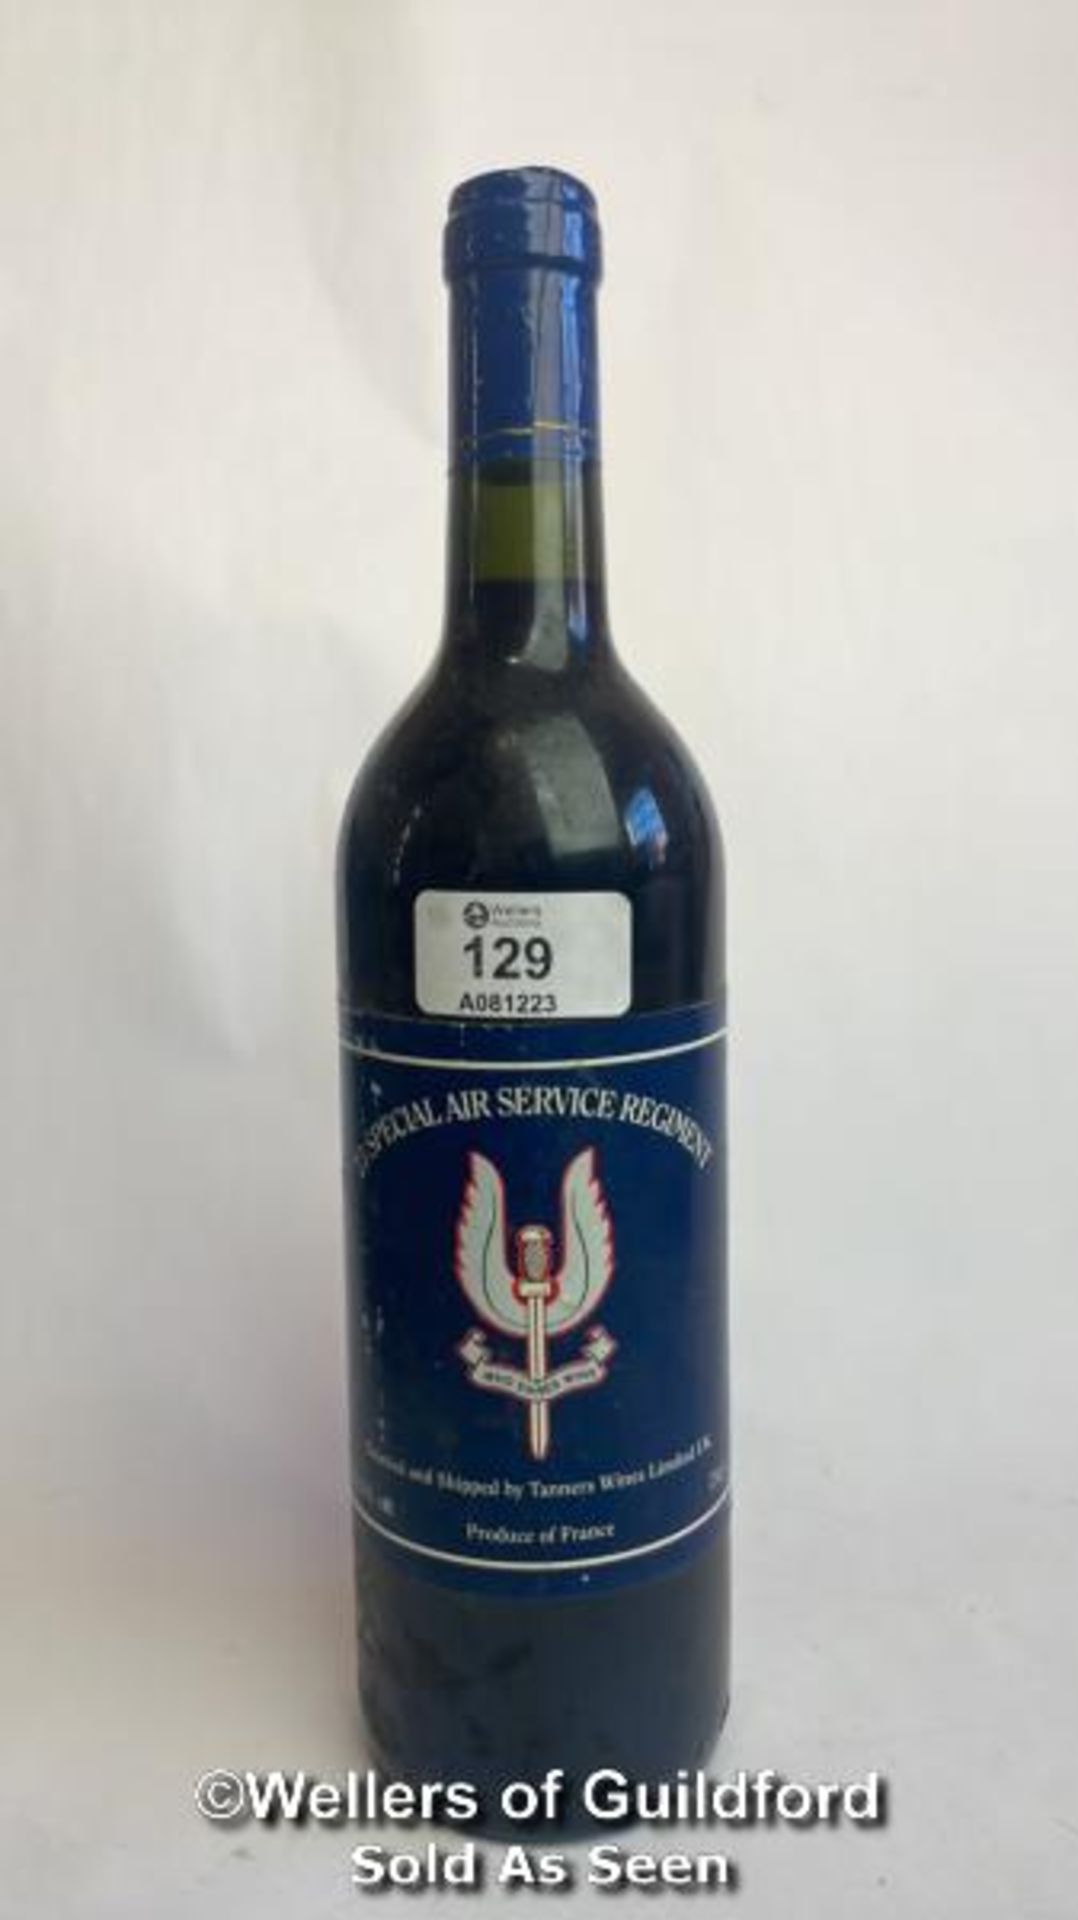 23 Special Air Service Regiment, Tanners Wine, 75cl, 11.5% / Please see images for fill level and